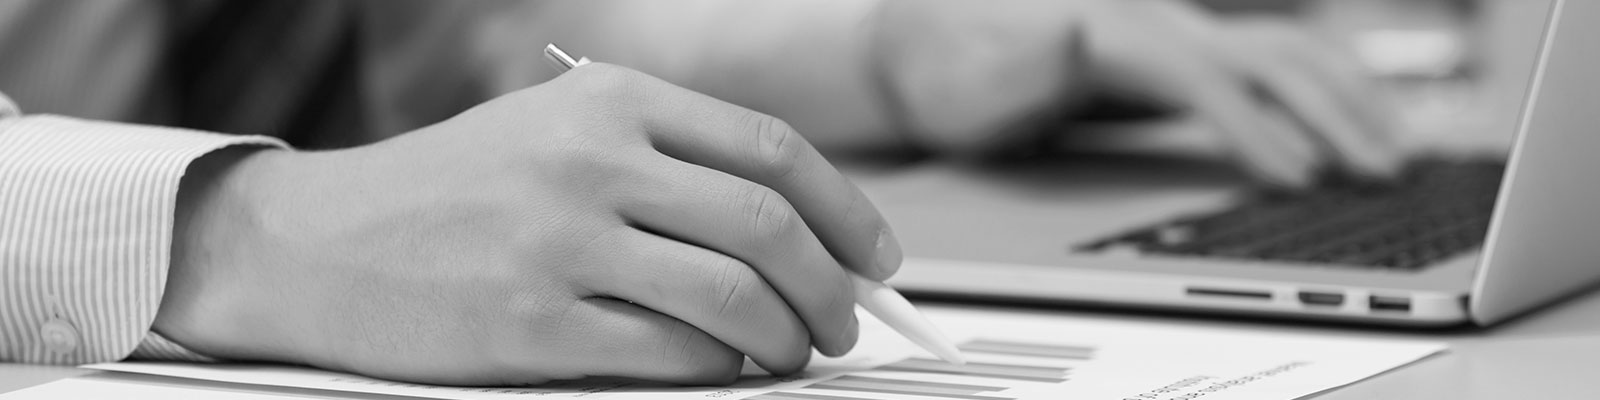 Stock image of a hand holding a pen by a computer